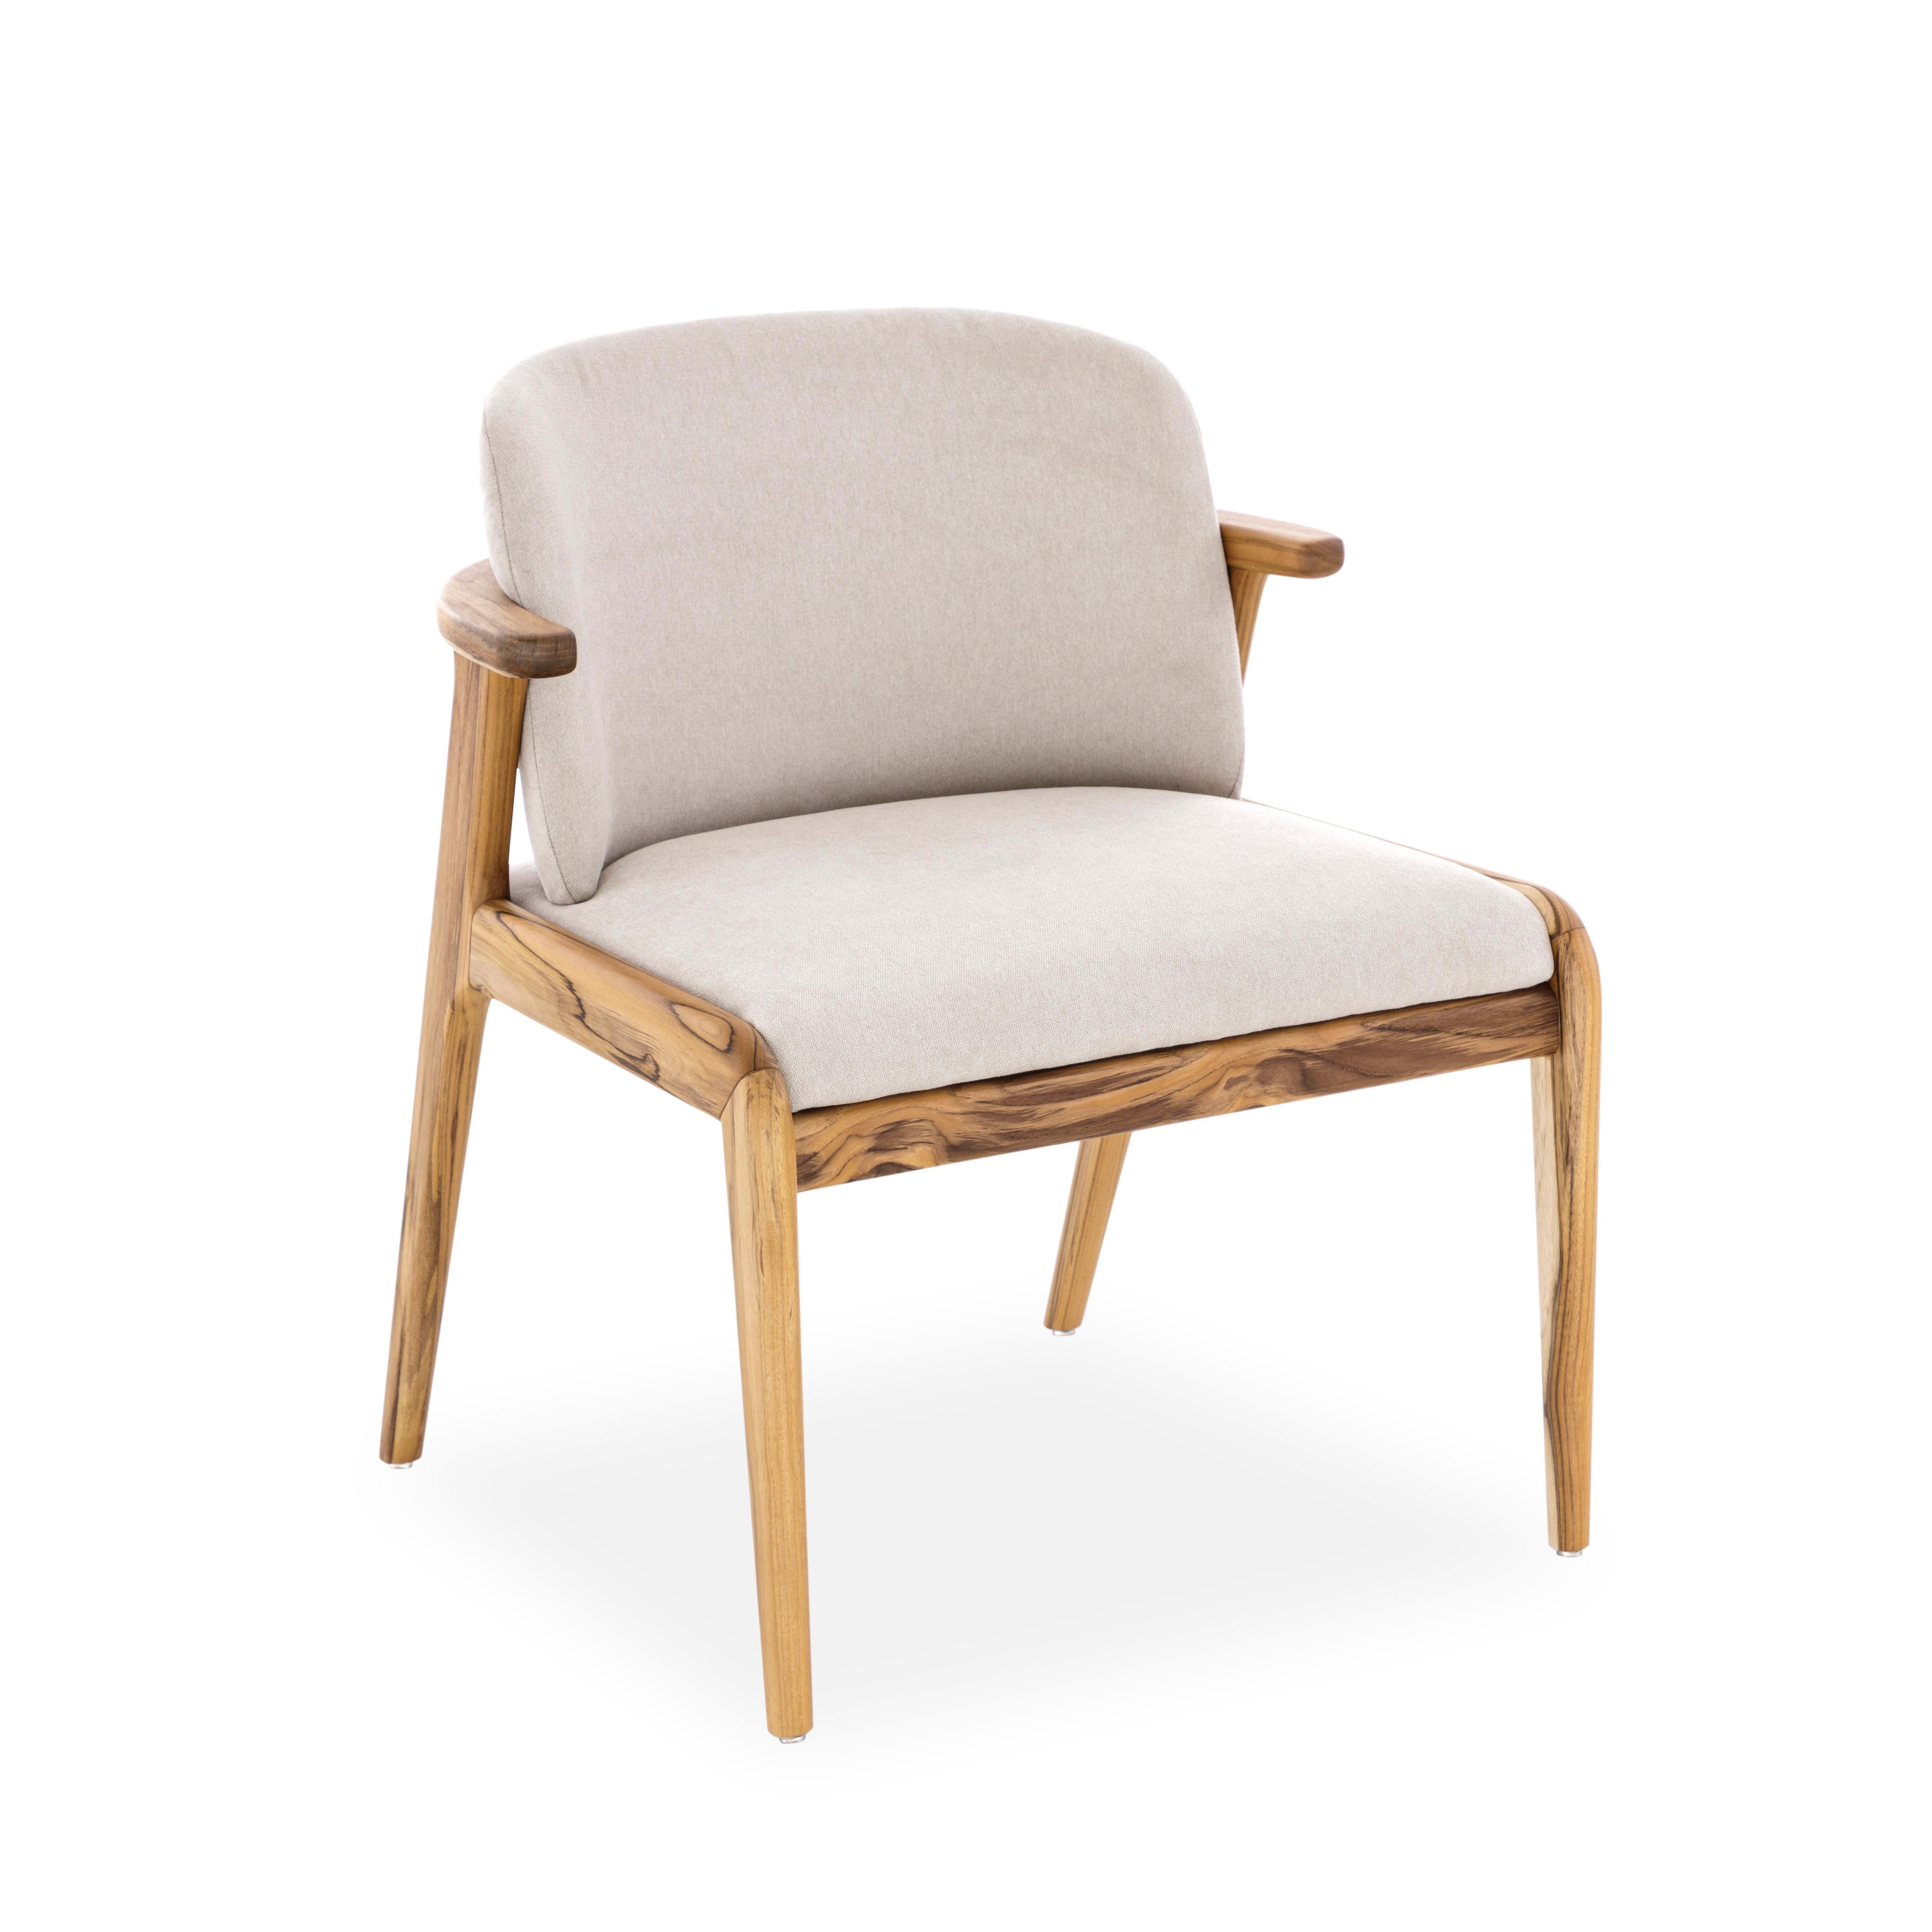 Nowe Dining Chair in Teak Wood Finish and Beige Cotton Fabric In New Condition For Sale In Miami, FL